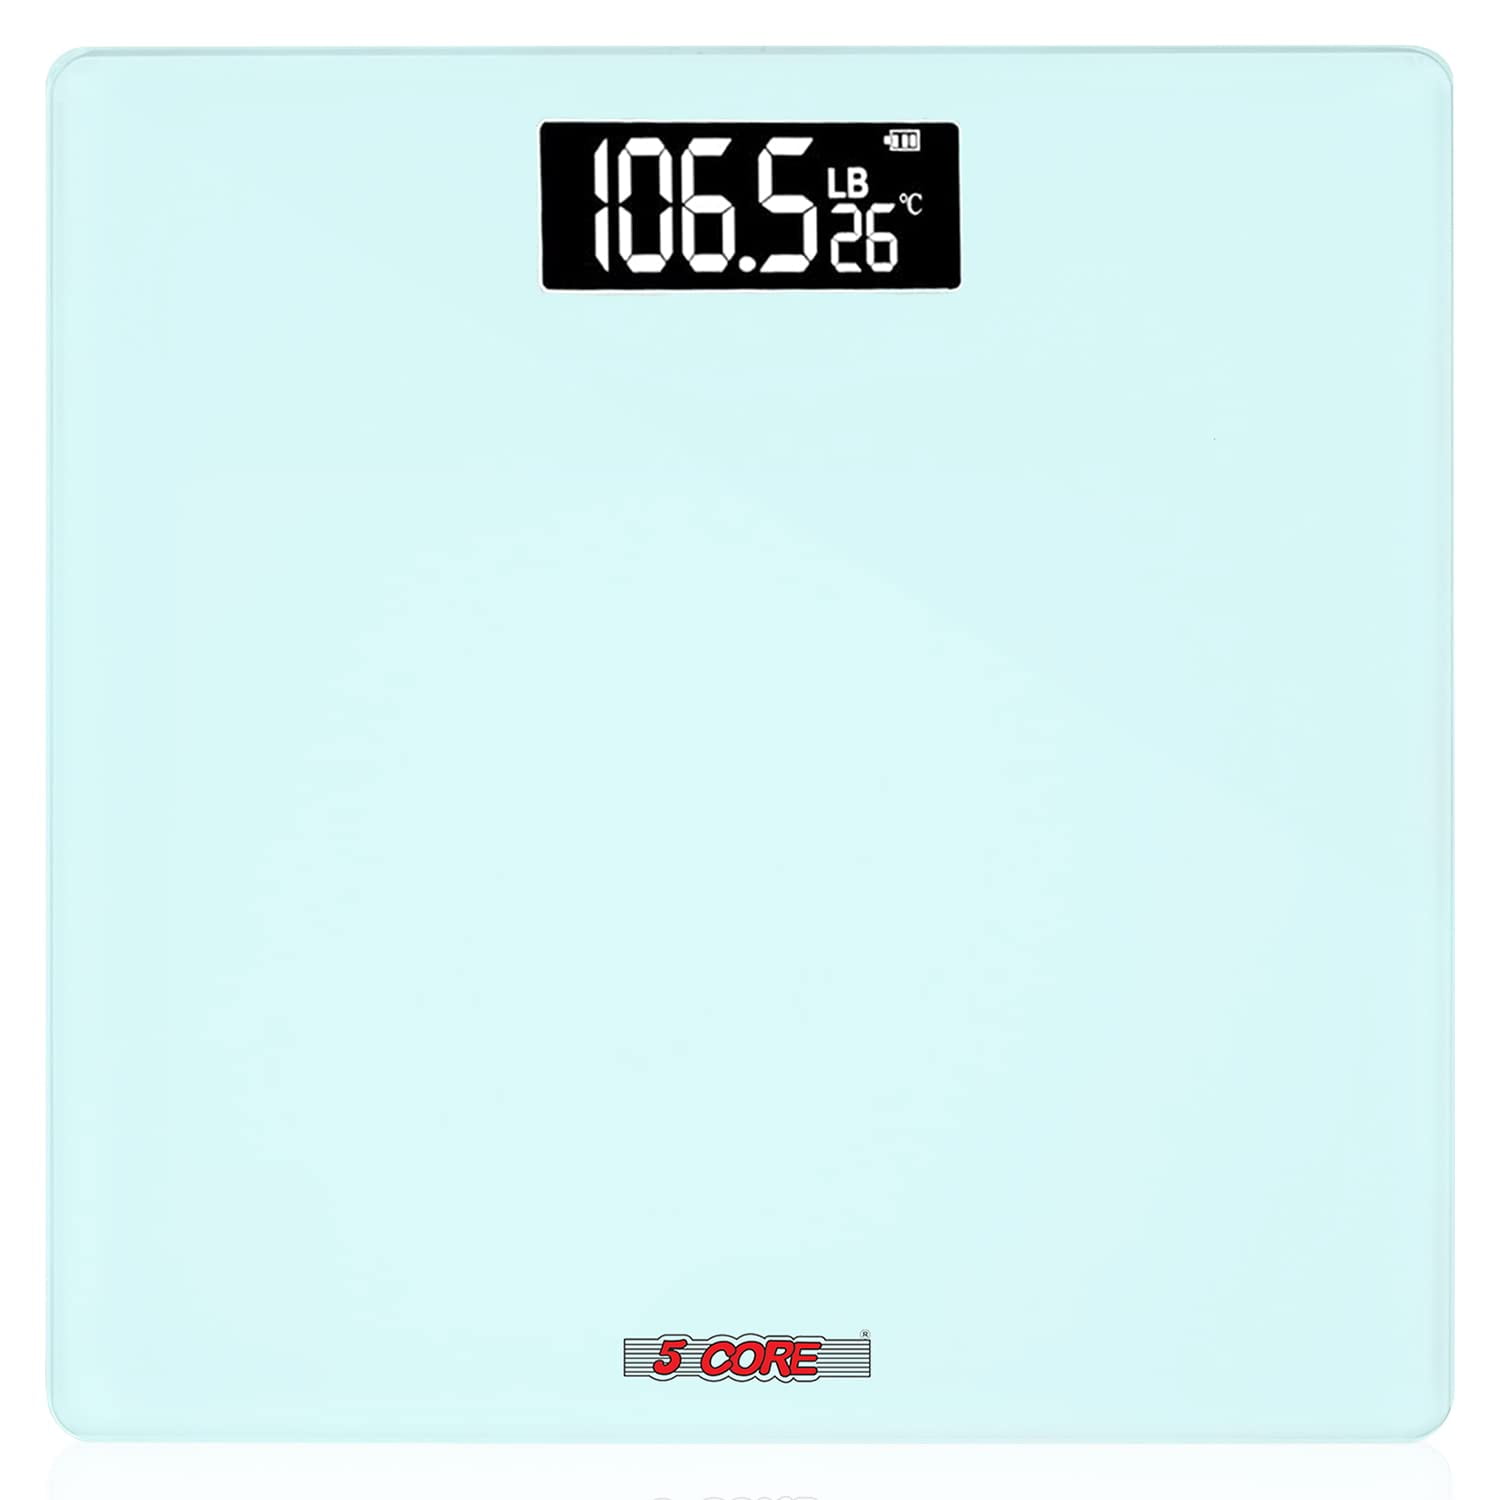 Rechargeable Digital Scale for Body Weight, Step-On Technology, High  Capacity - 400 lbs., 1 Pack - Dillons Food Stores